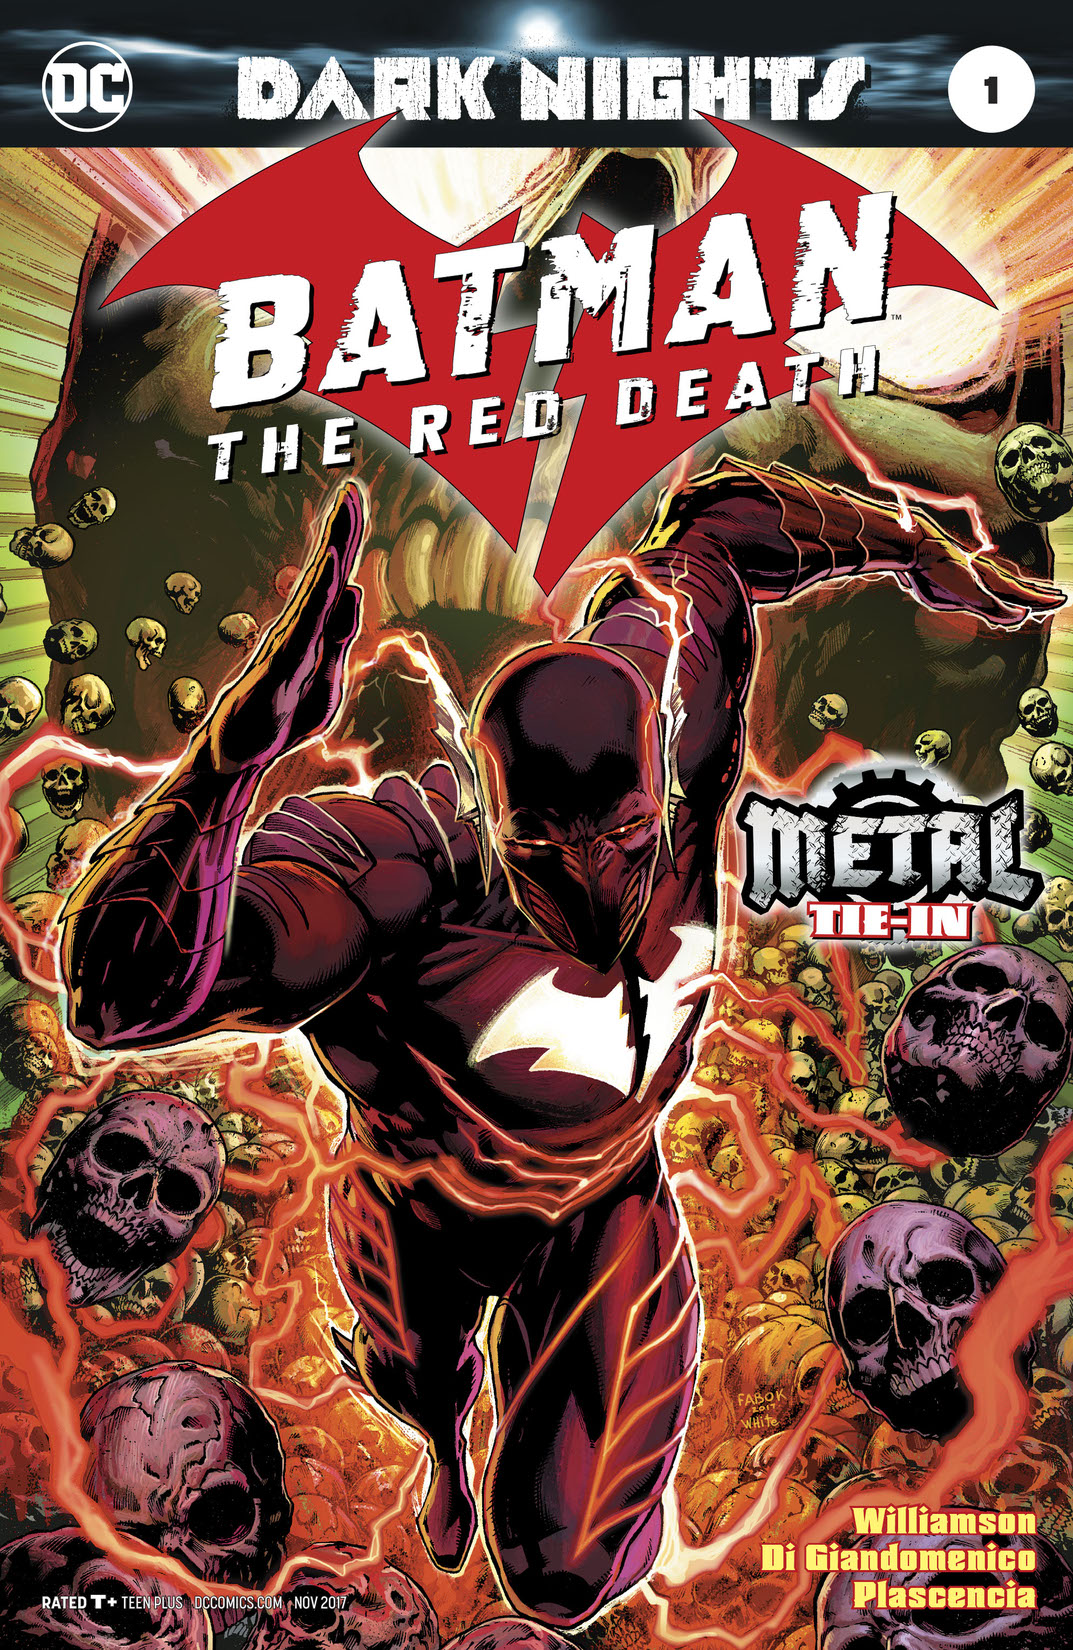 Batman: The Red Death #1 preview images